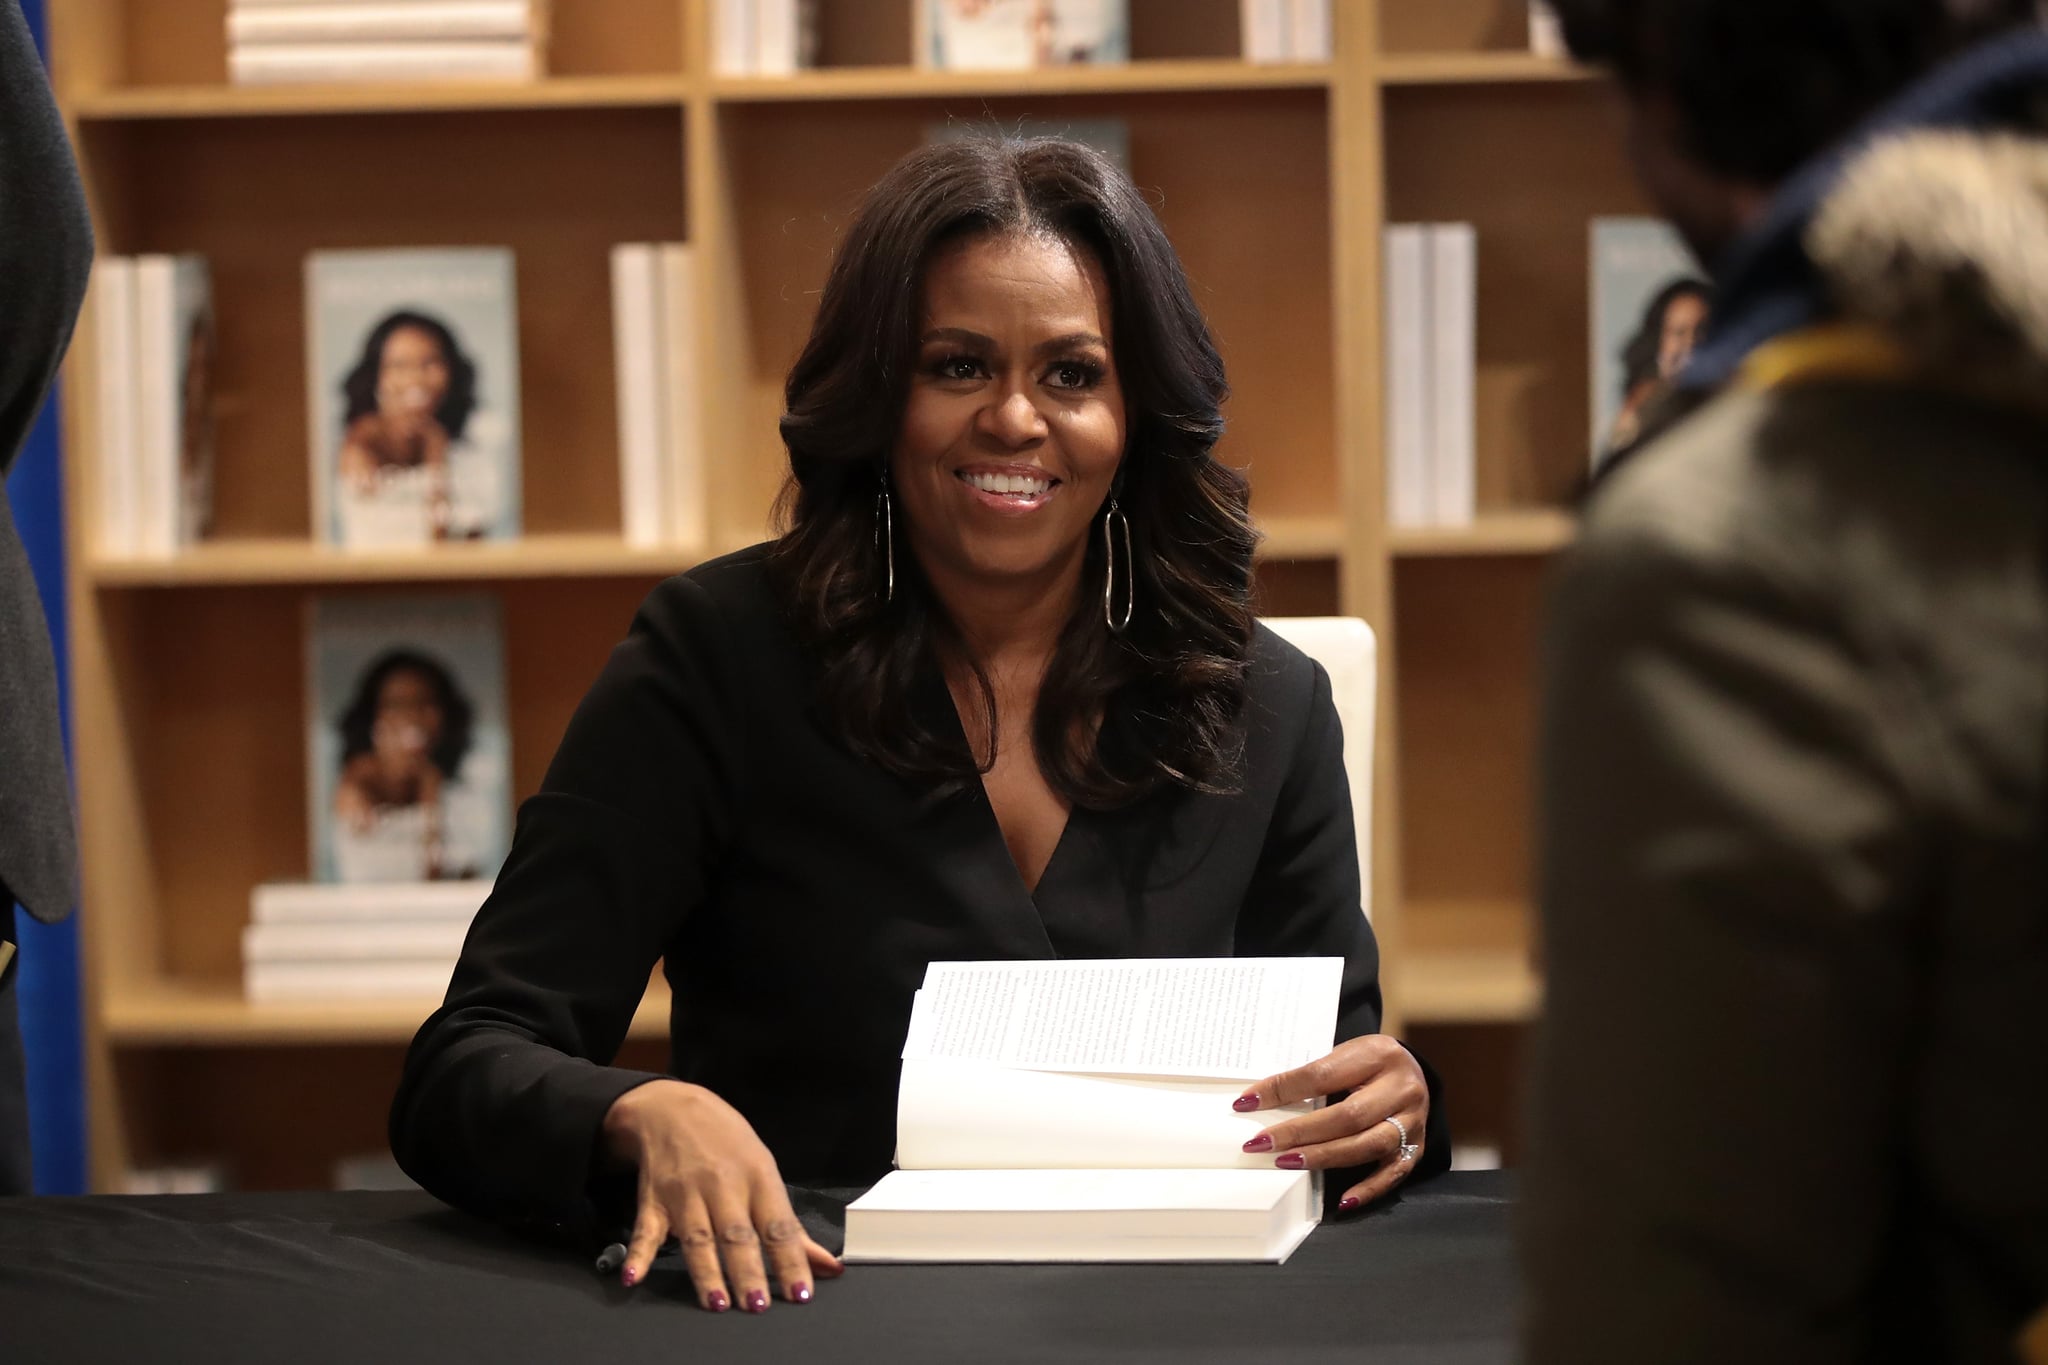 CHICAGO, IL - NOVEMBER 13:  Former first lady Michelle Obama kicks off her ?Becoming? book tour with a signing at the Seminary Co-op bookstore on November 13, 2018 in Chicago, Illinois. In the book, which was released today, Obama describes her journey from Chicago's South Side to the White House.  (Photo by Scott Olson/Getty Images)